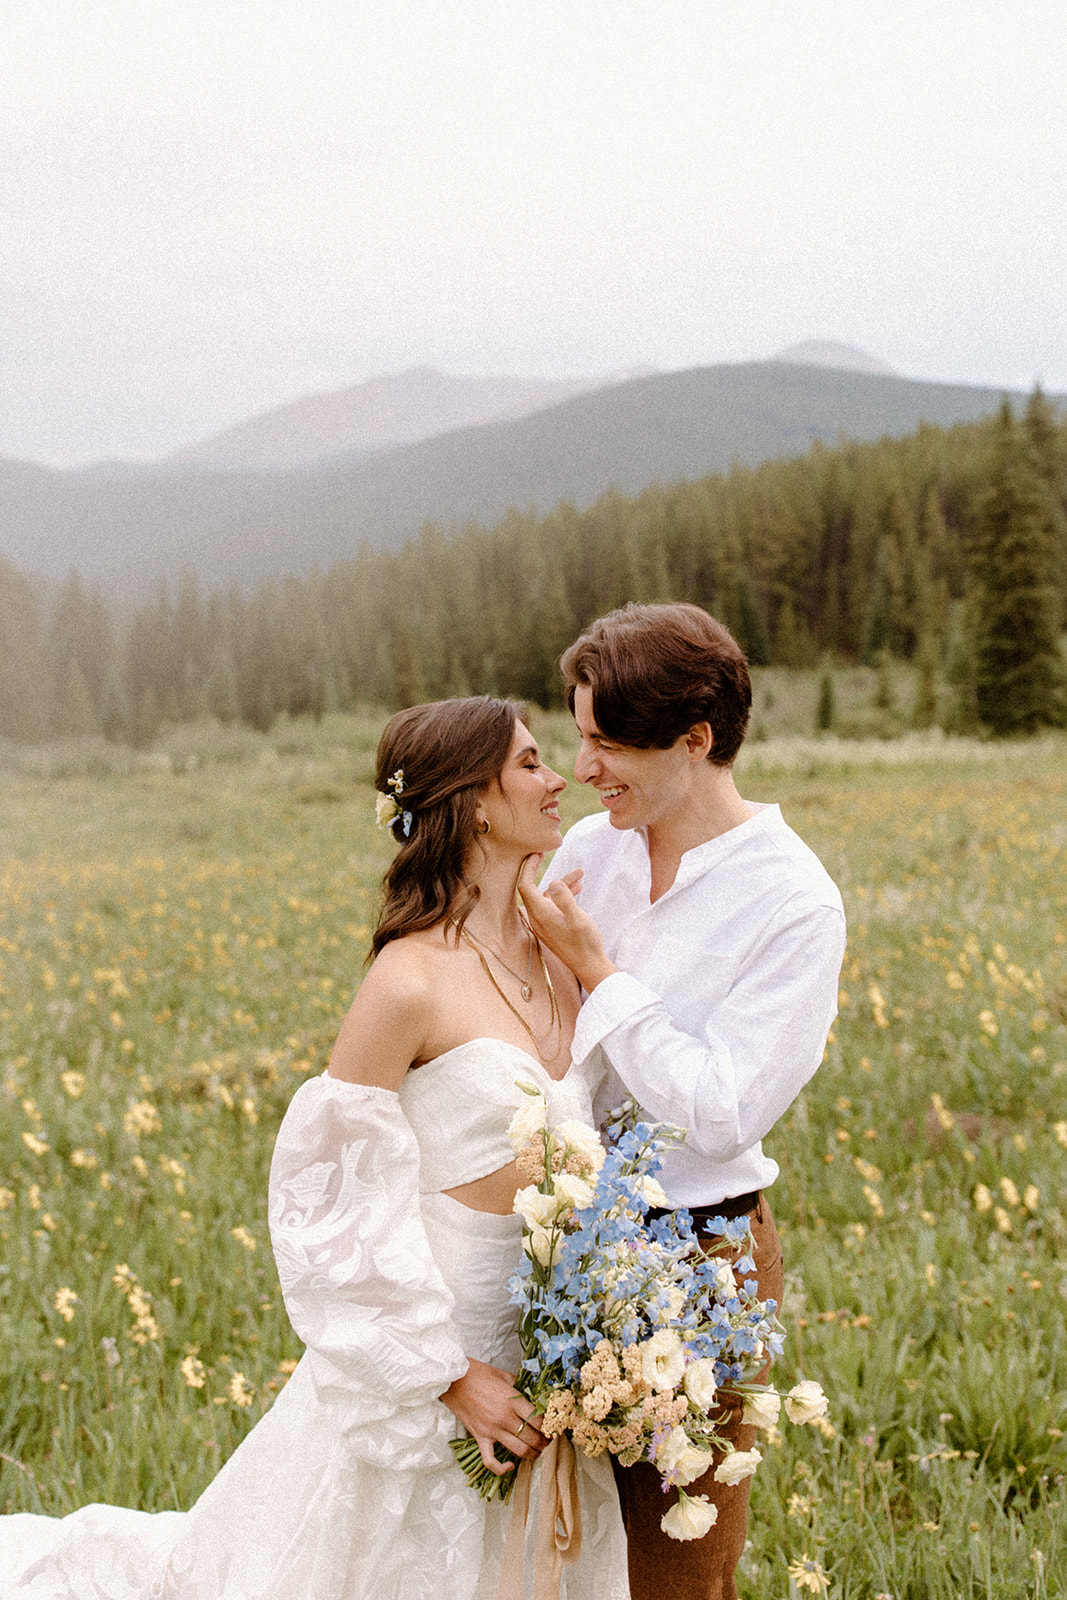 How to Elope in Colorado